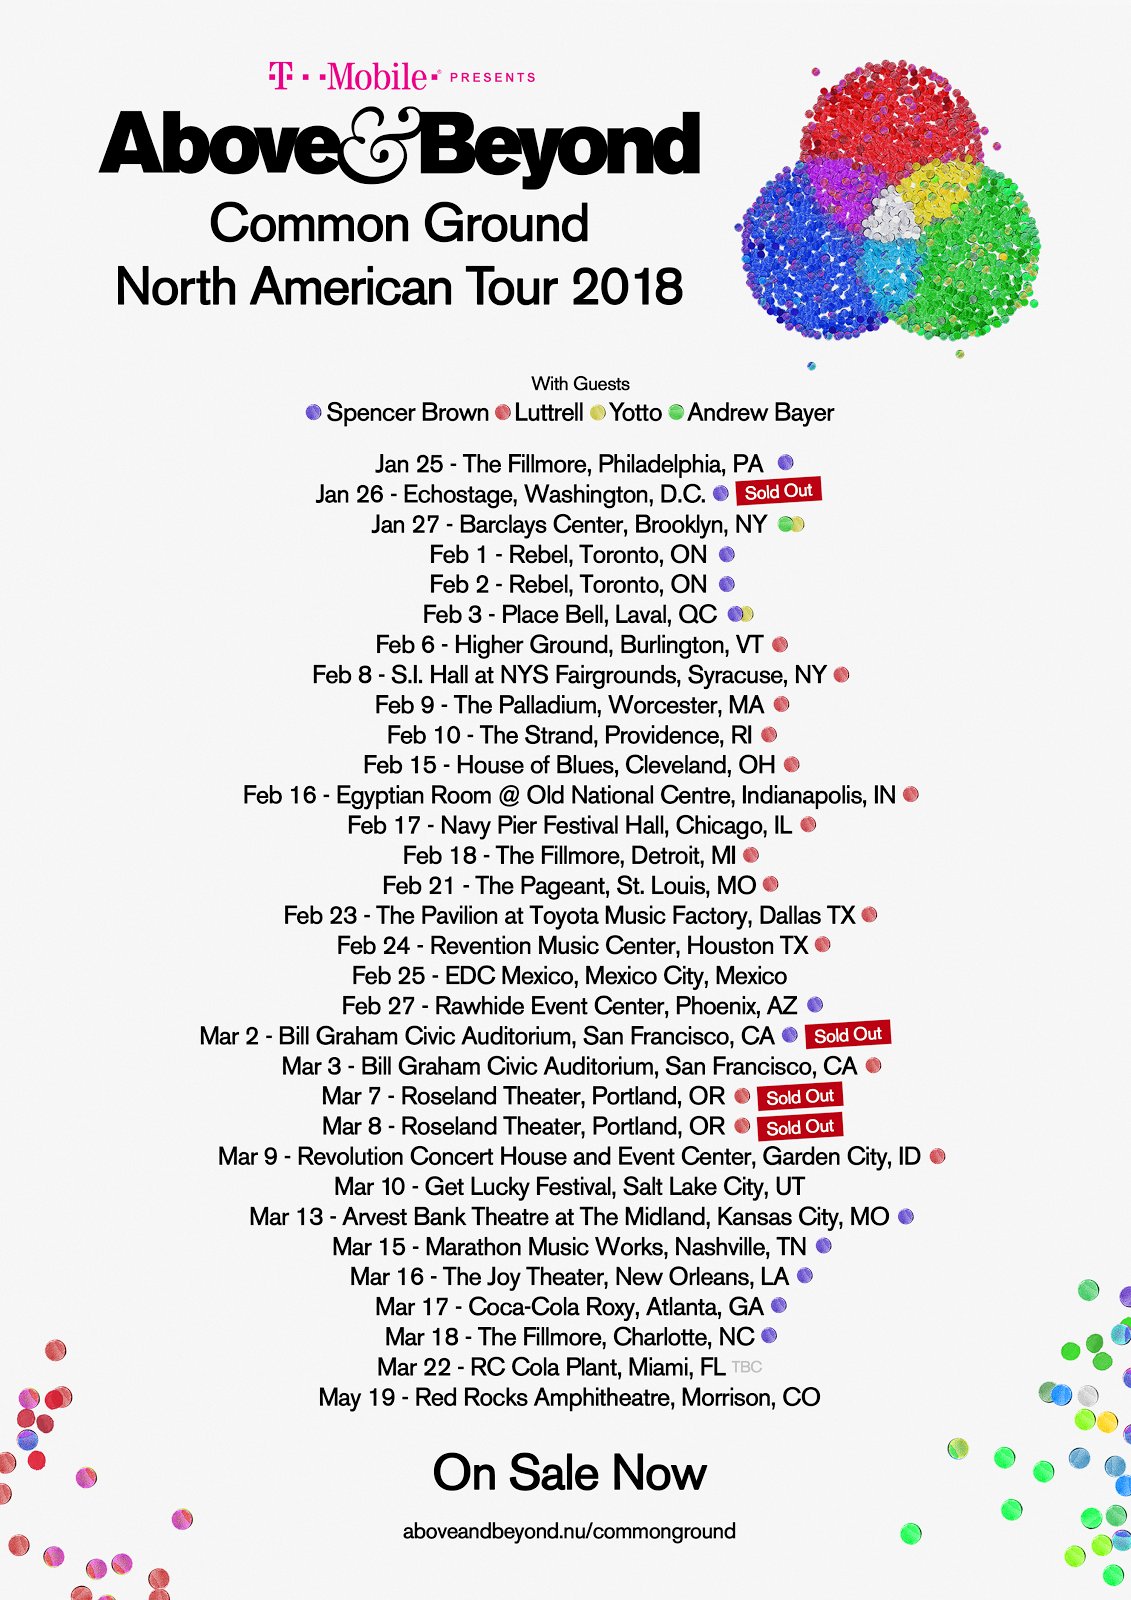 Above and Beyond Common Ground Tour dates updated